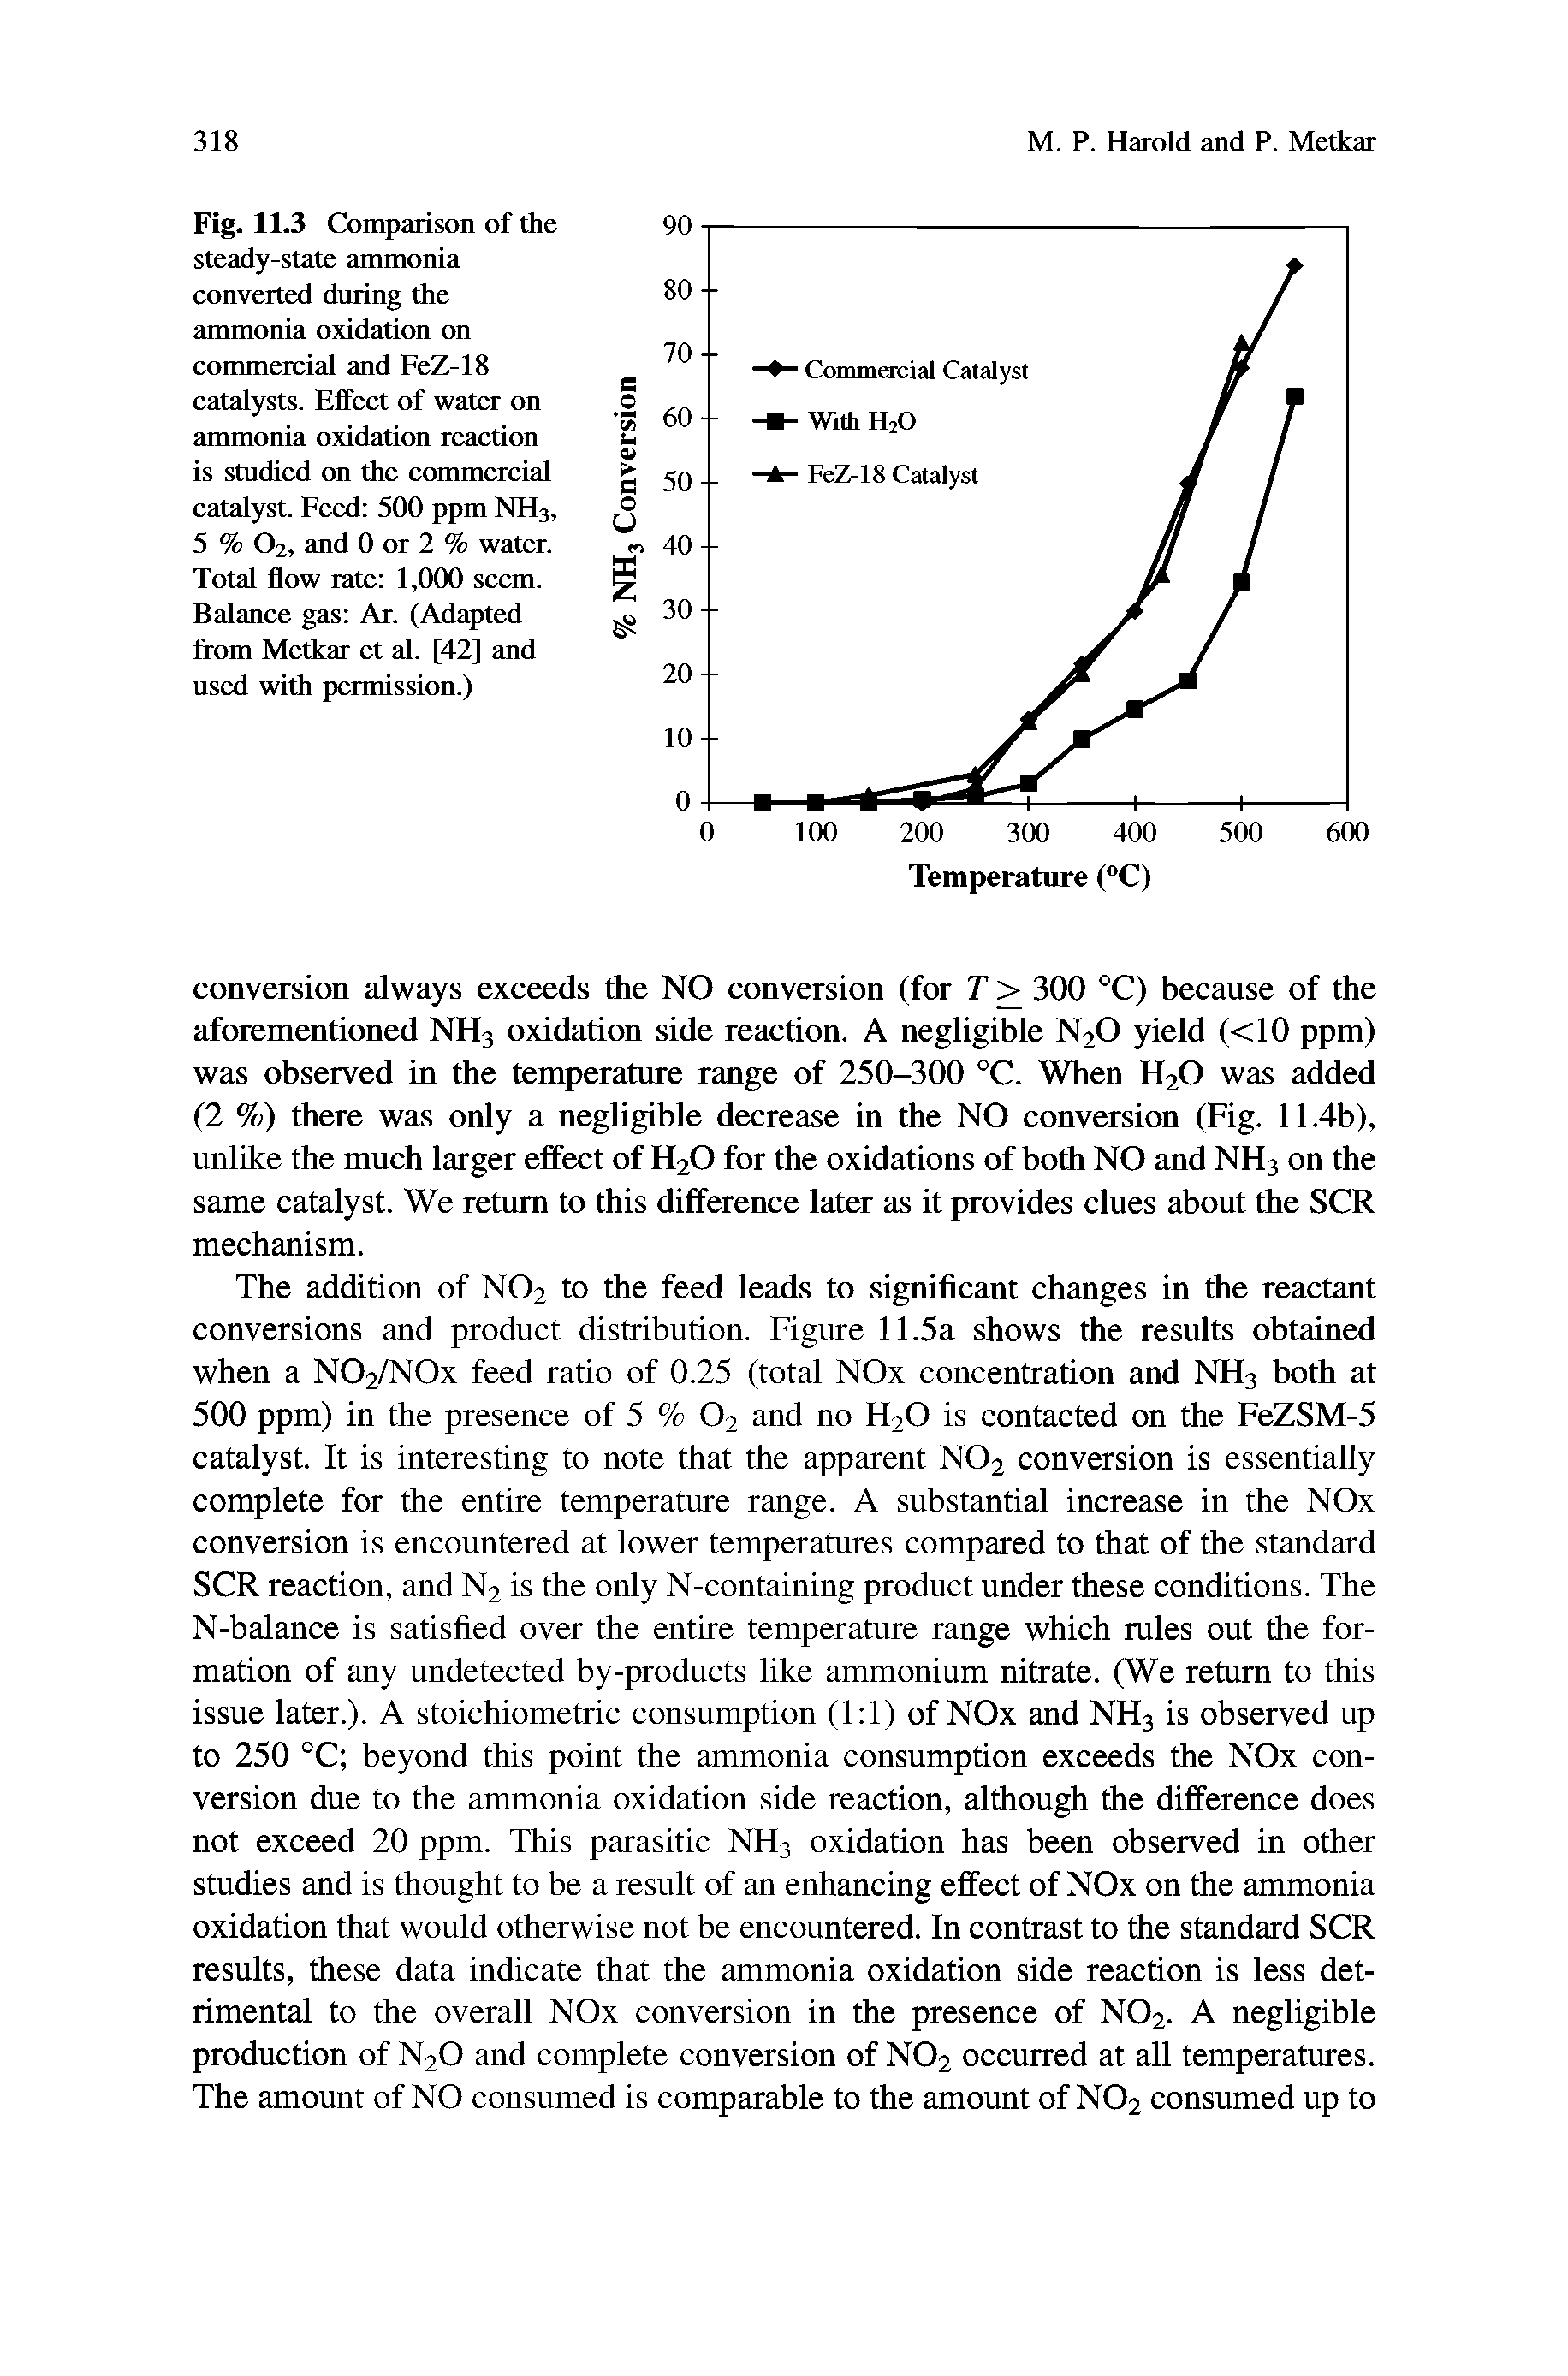 Fig. 11.3 Comparison of the steady-state ammonia converted during the ammonia oxidation on commercial and FeZ-18 catalysts. Effect of water on ammonia oxidation reaction is studied on the commercial catalyst. Feed 500 ppm NH3, 5 % O2, and 0 or 2 % water. Total flow rate 1,000 seem. Balance gas Ar. (Adapted from Metkar et al. [42] and used with permission.)...